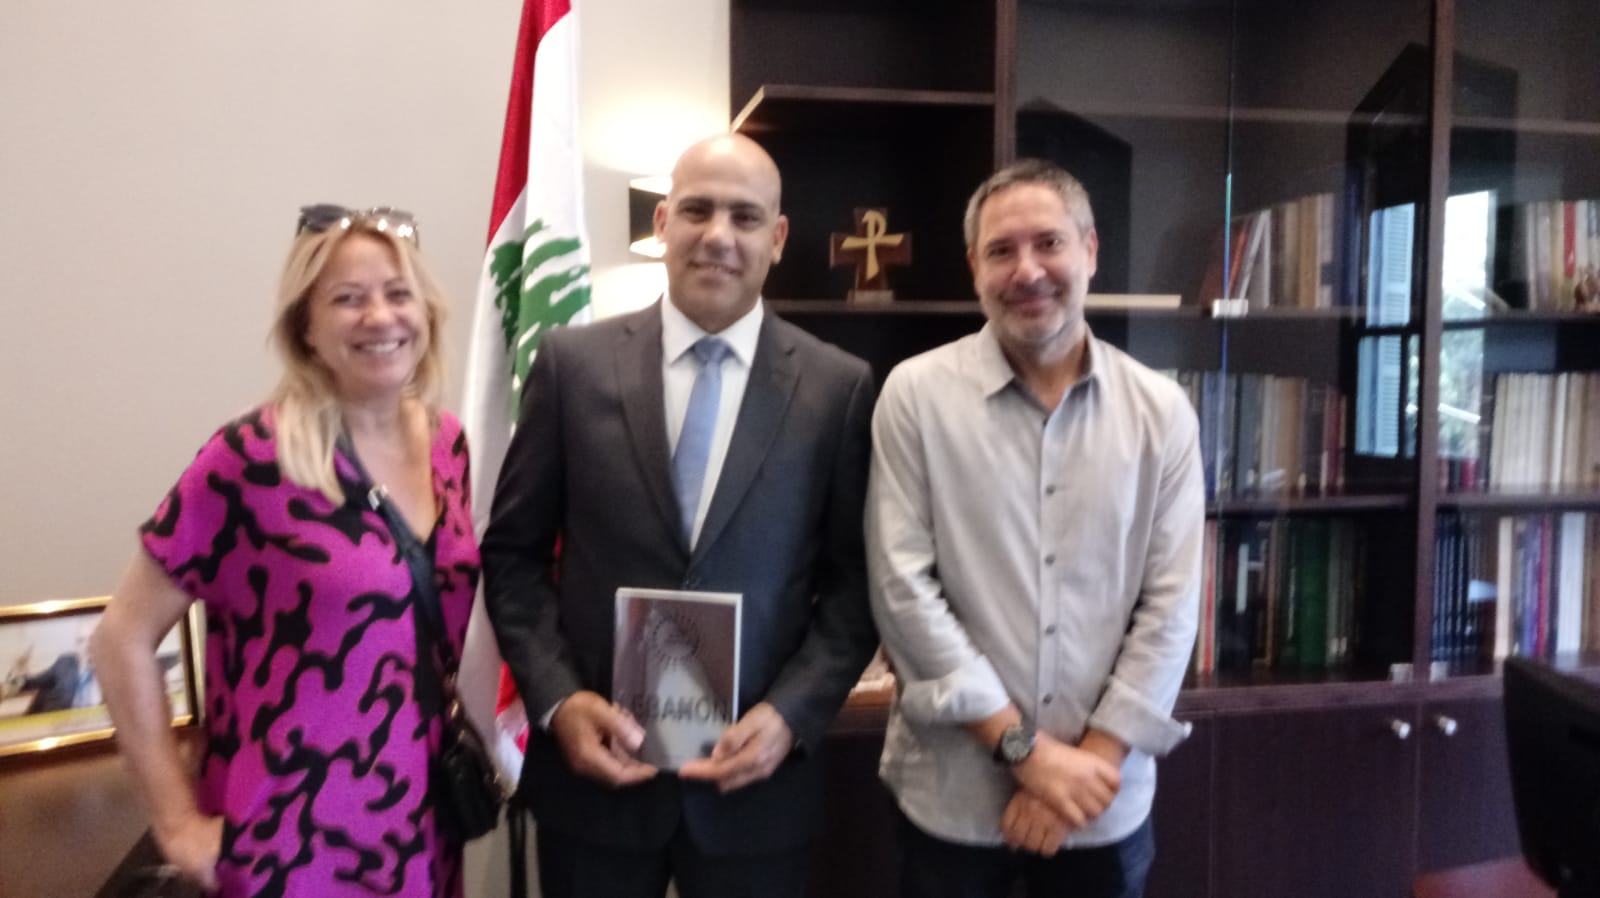 At the Lebanese National Library with Delphine Barets (left), Co-Founder Those Who Inspire, Hassan Akra (centre), Chairman Lebanese National Library, and Alejandro Andrés (right), Director of Those Who Inspire Lebanon © Those Who Inspire